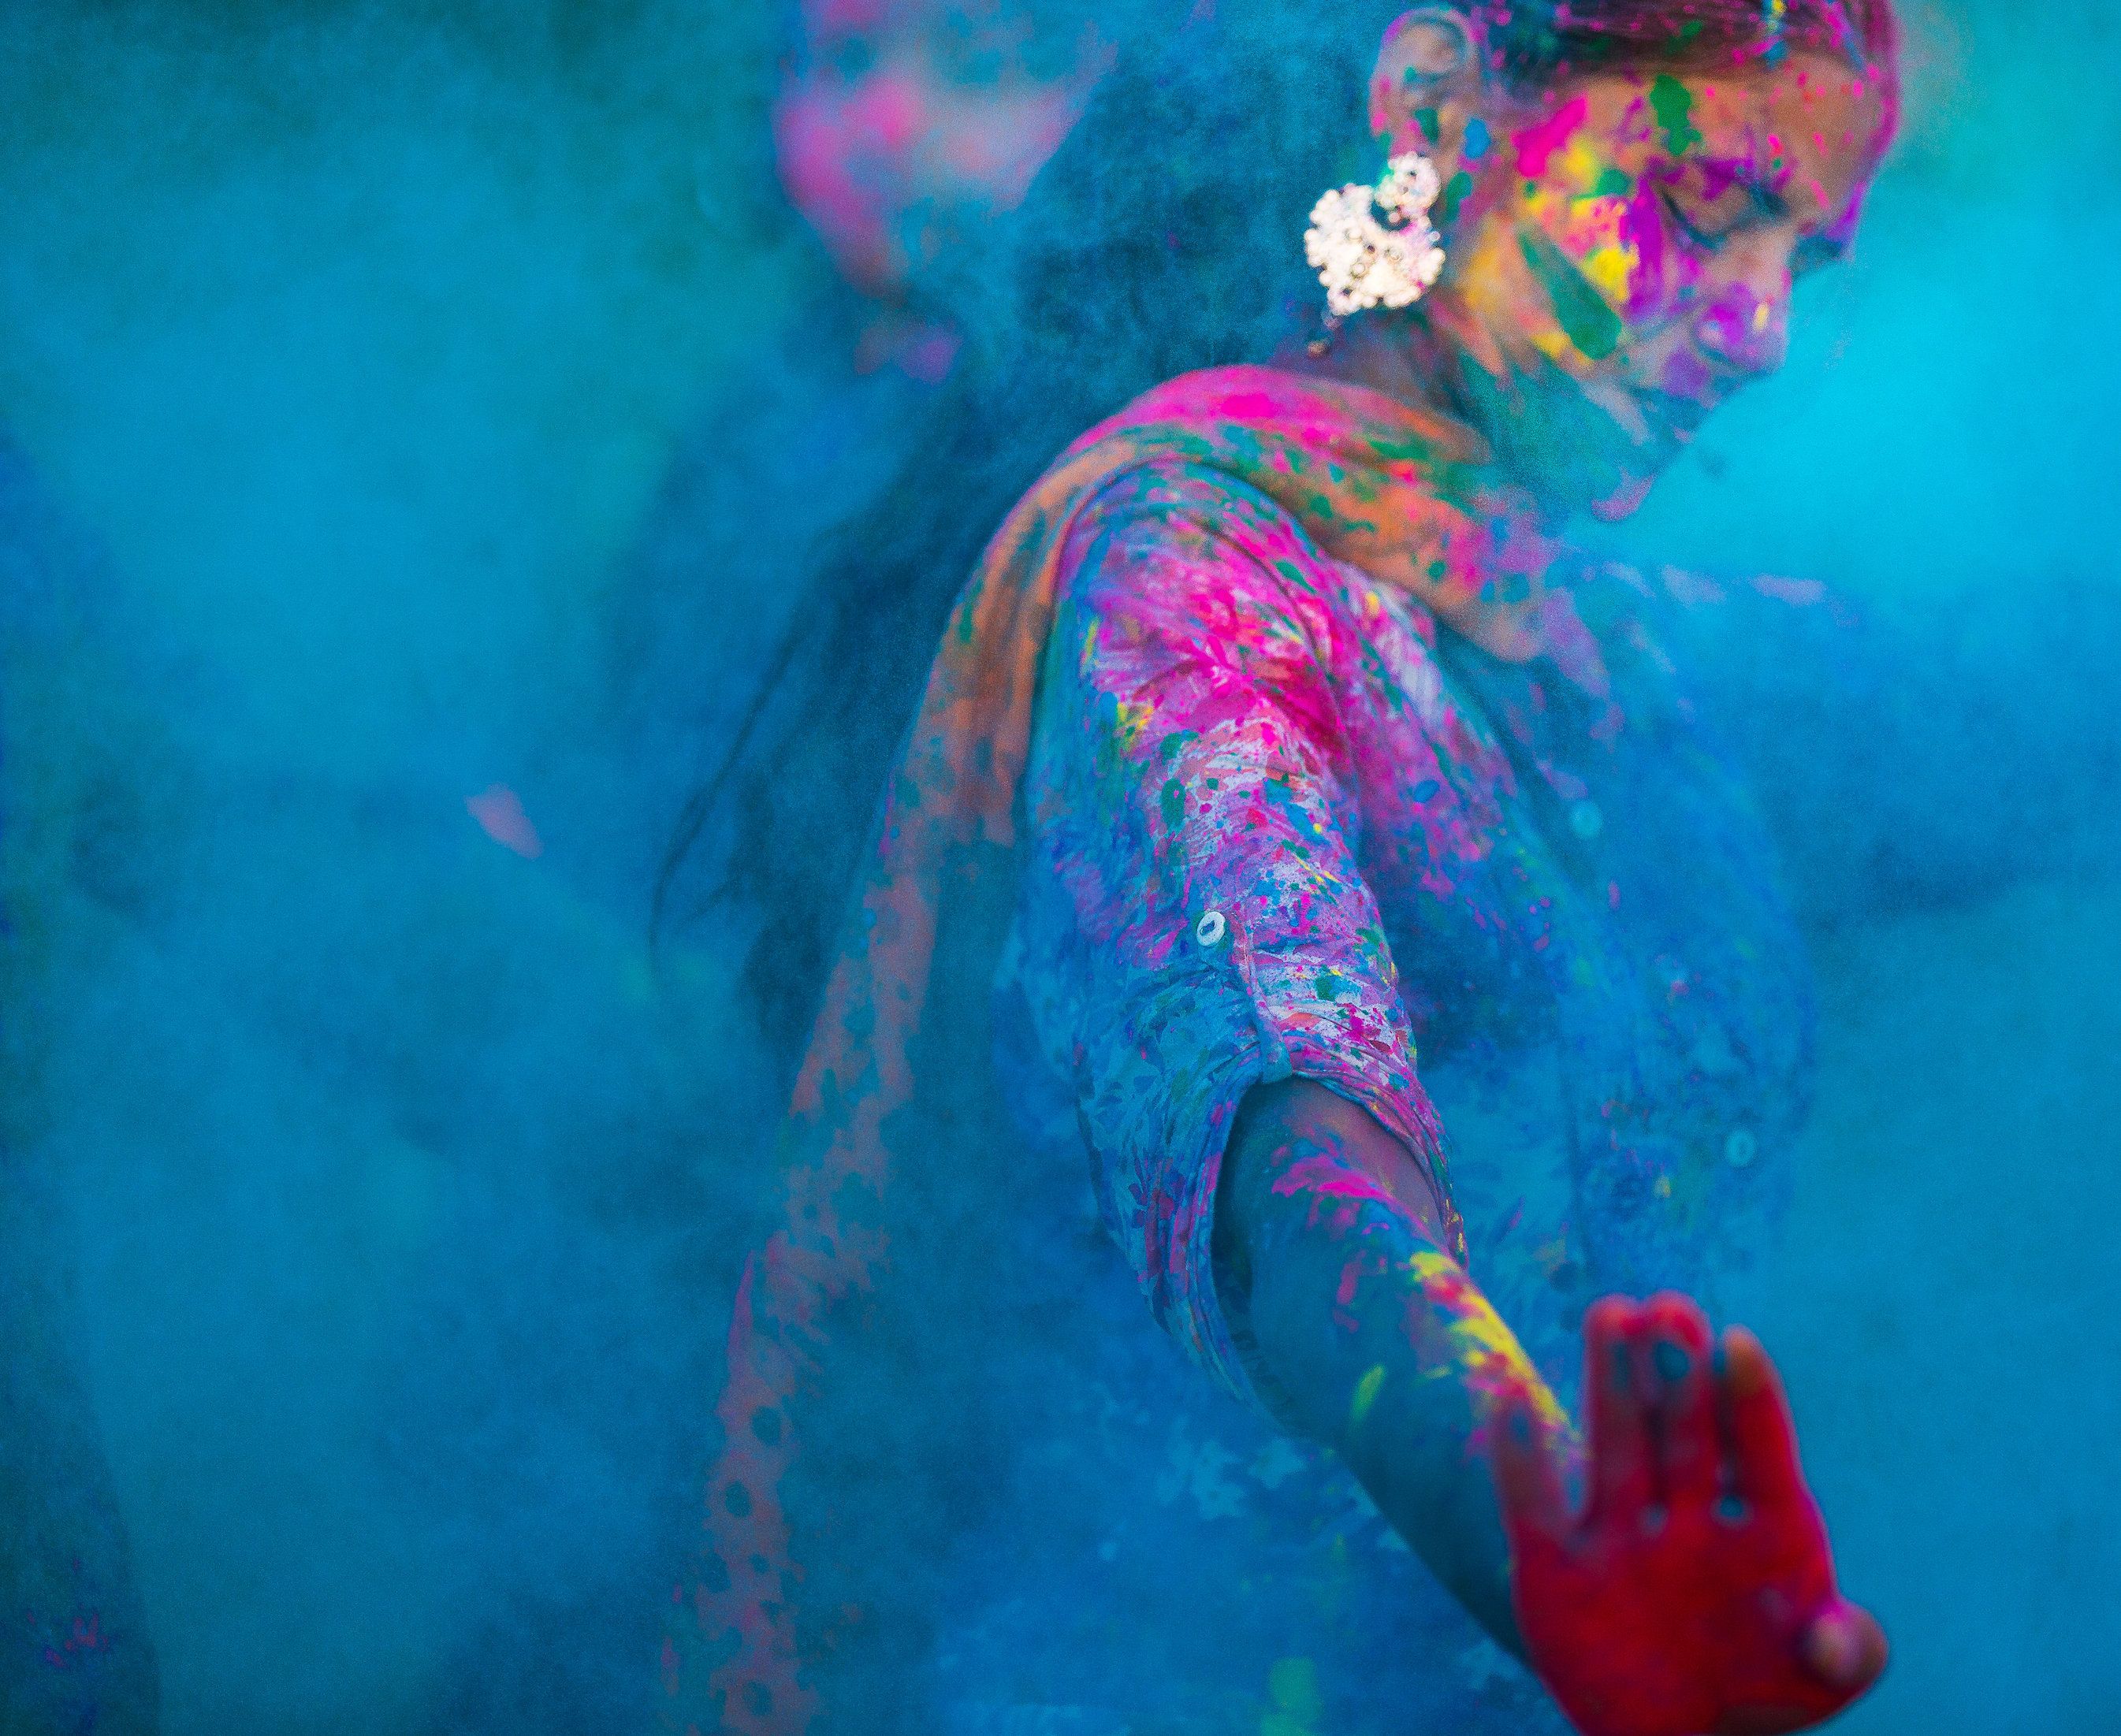 The Festival of Holi in India Is Marked by Instances of Sexual Assault